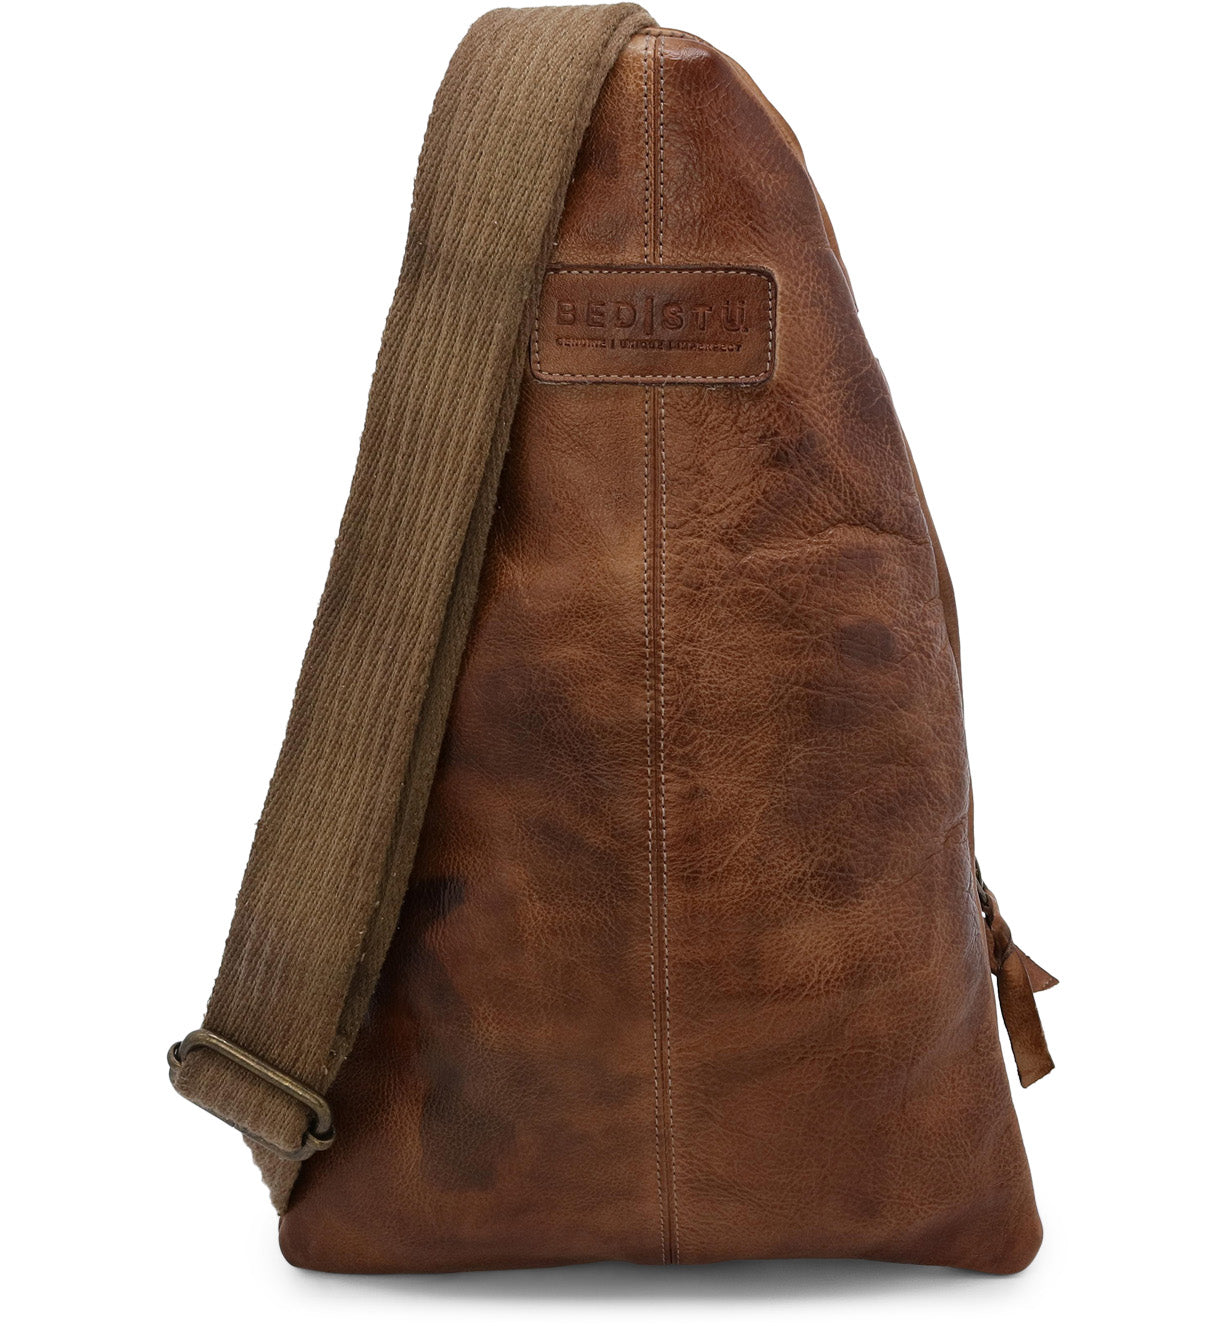 A brown leather Andie sling bag with straps from Bed Stu.